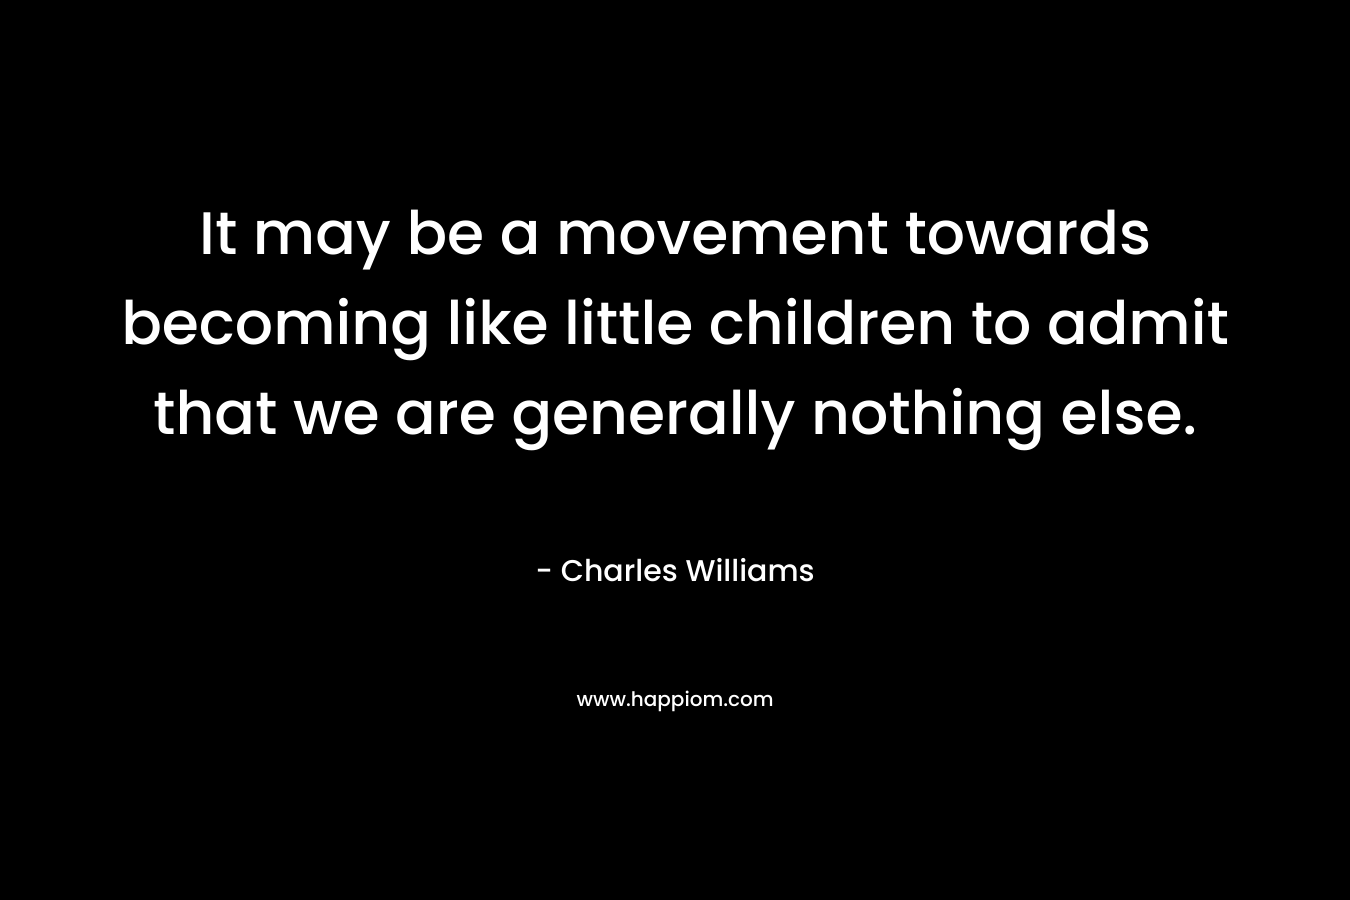 It may be a movement towards becoming like little children to admit that we are generally nothing else. – Charles Williams